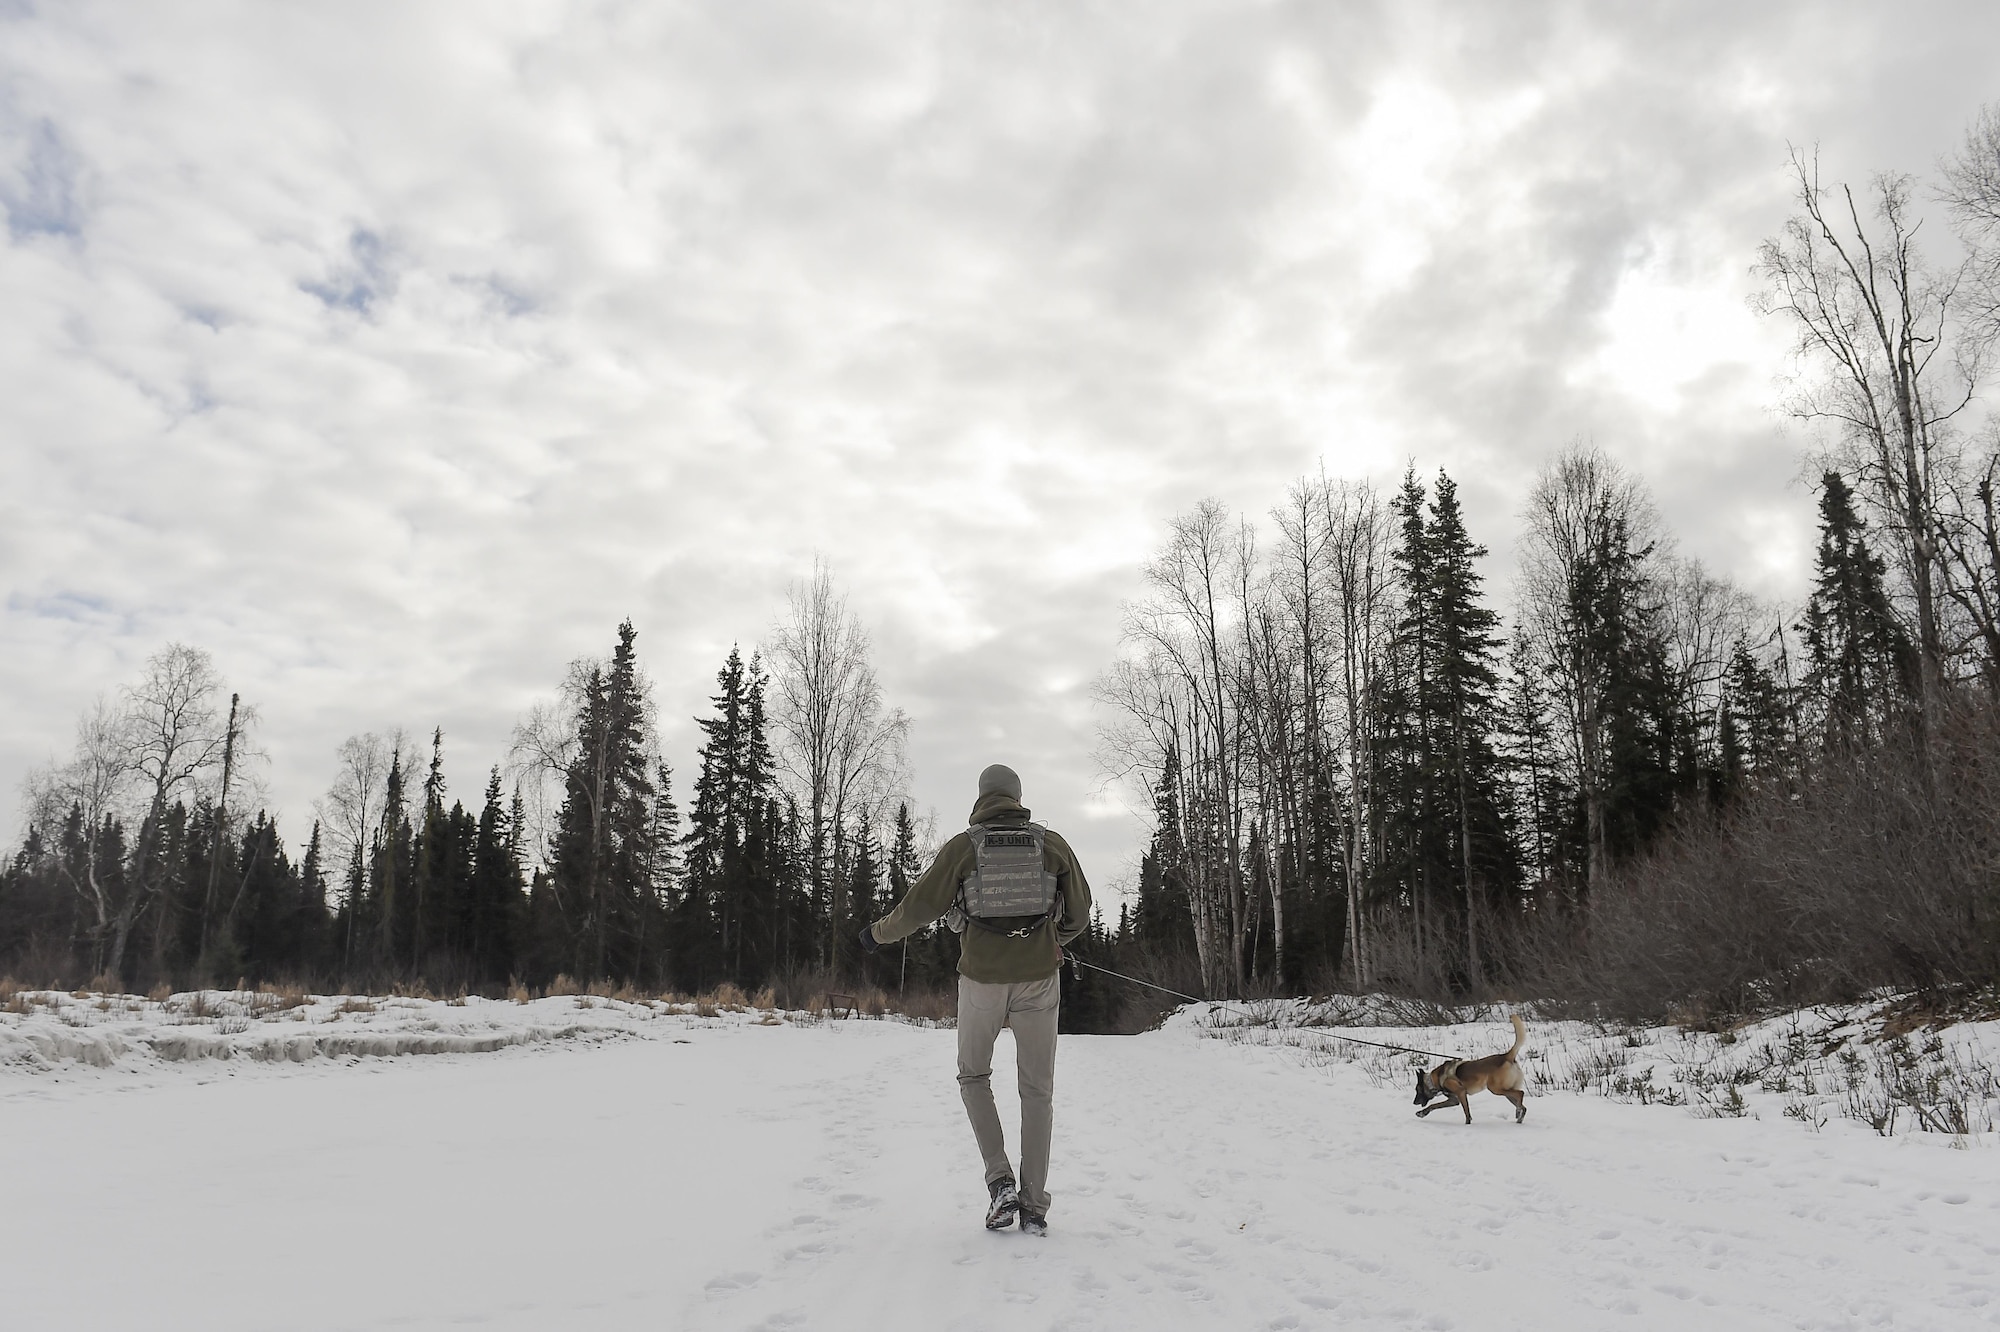 U.S. Air Force Staff Sgt. Joe Burns and military working dog, Ciko, assigned to the 673rd Security Forces Squadron, practice searching for simulated hidden explosives while conducting K-9 training at Joint Base Elmendorf-Richardson, Alaska, March 17, 2016. The military working dog teams are trained to respond to various law enforcement emergencies as well as detect hidden narcotics and explosives. (U.S. Air Force photo/Alejandro Pena)